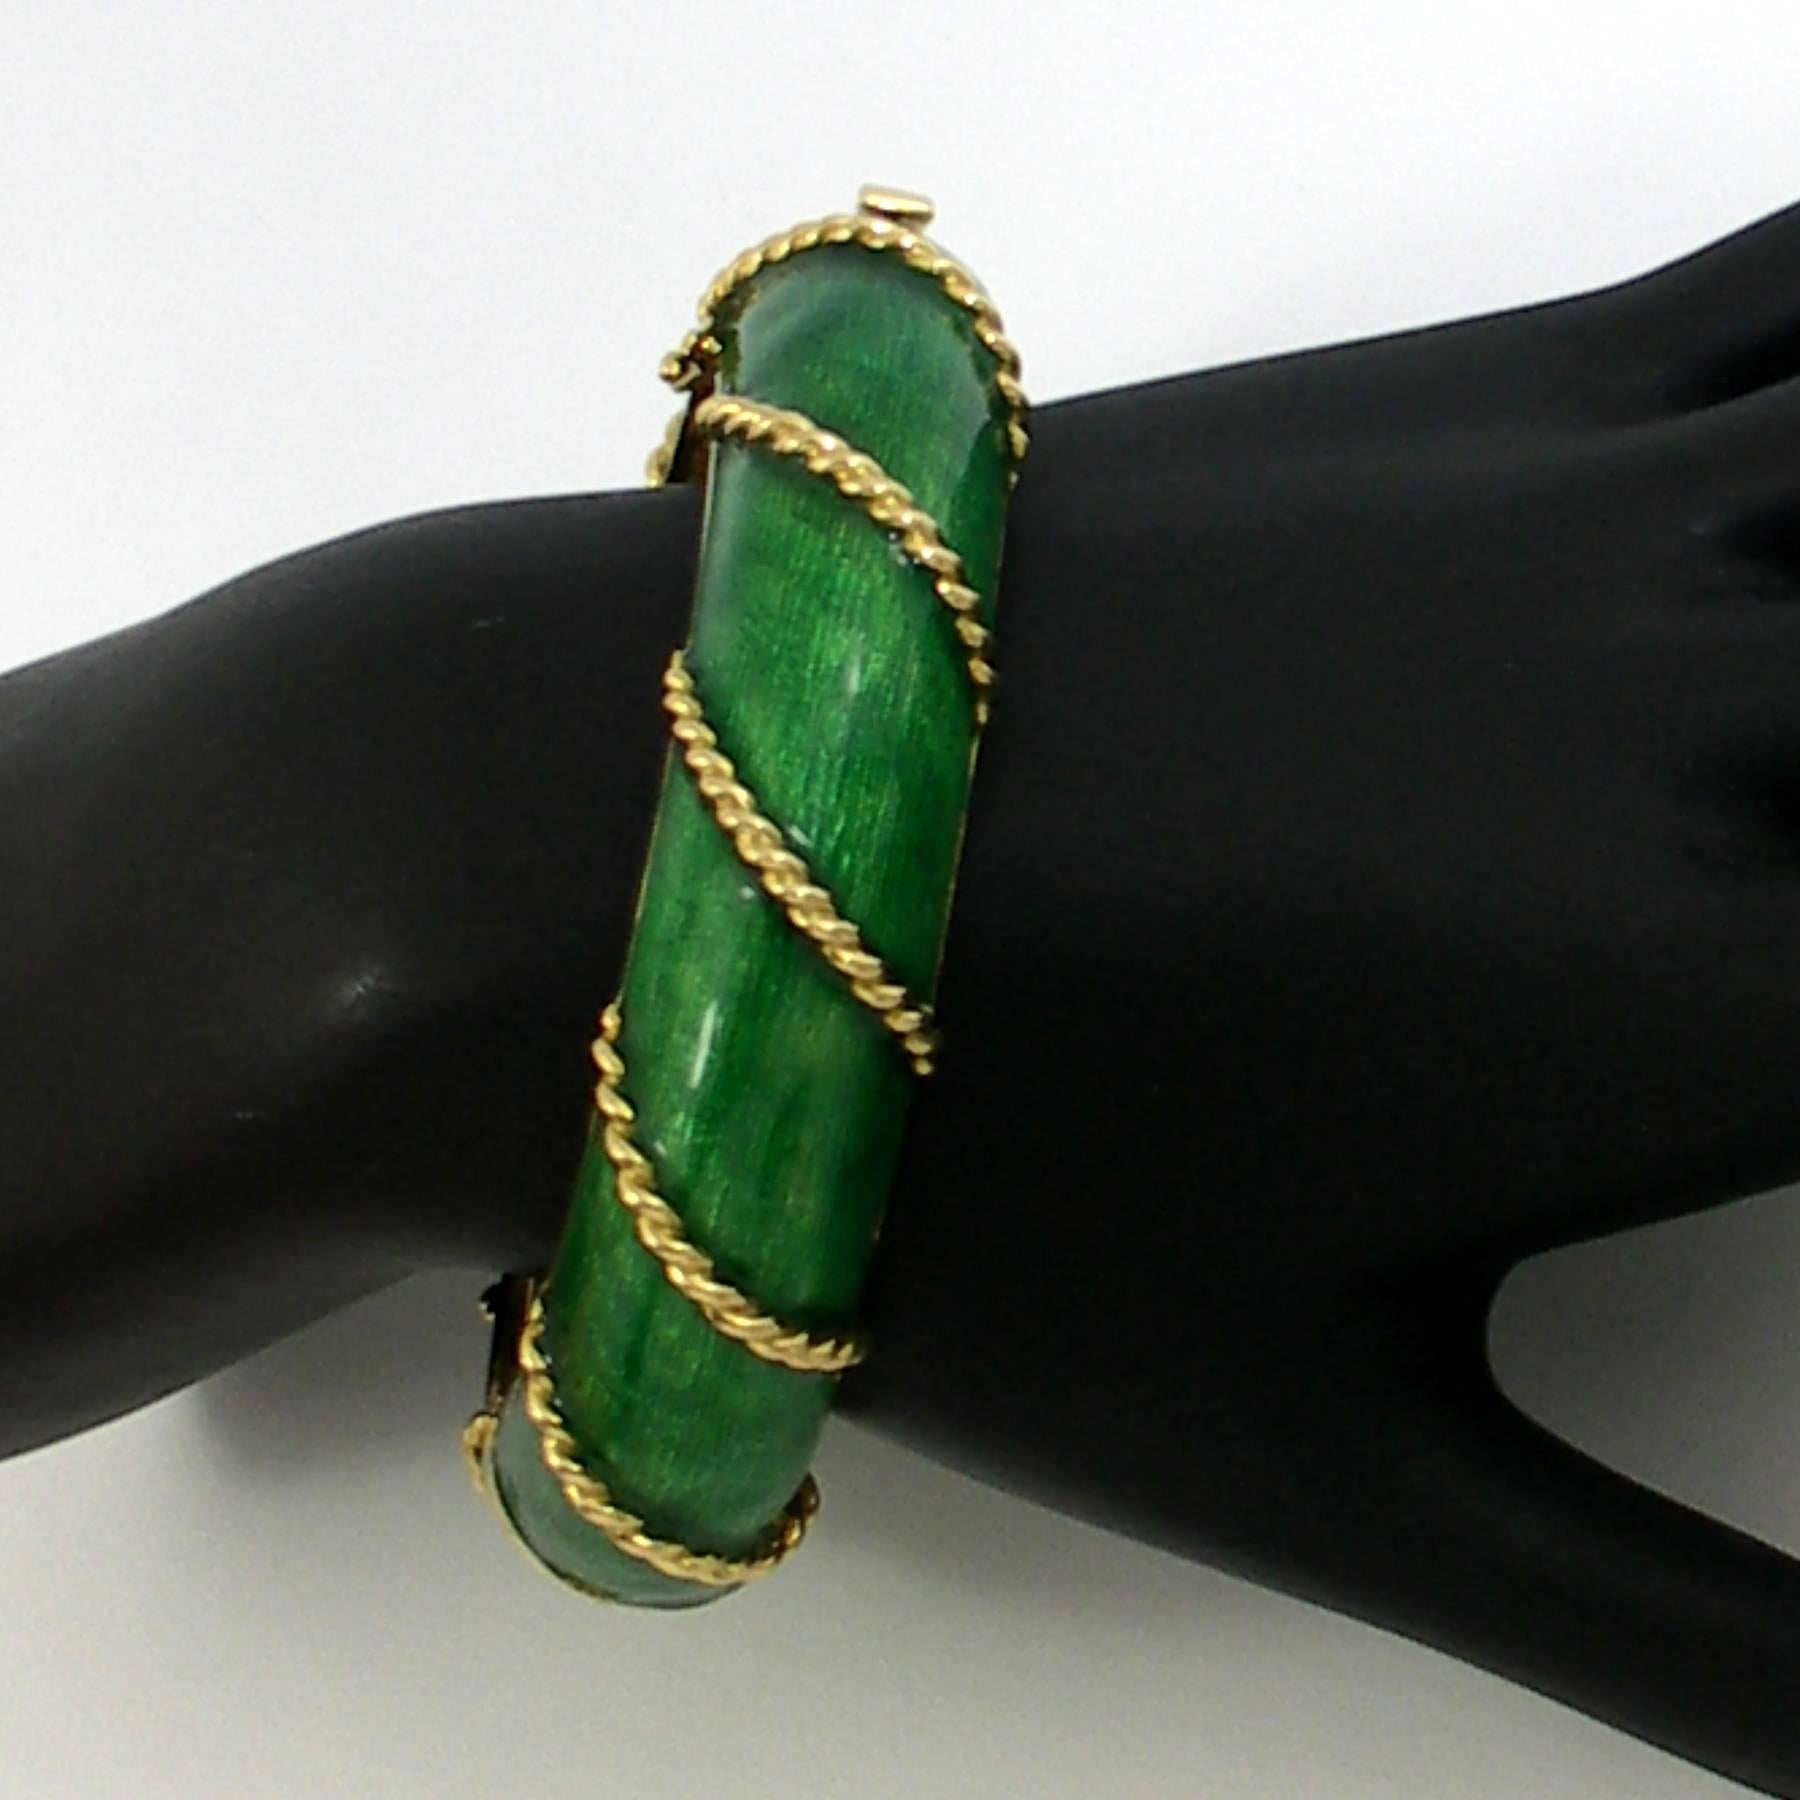 An 18K yellow gold bracelet measuring 3/4 of an inch wide, featuring a vivid green enamel, in cells, divided by a twisted rope design.
Inside Circumference 7 1/4 inches. Weight 83 grams.